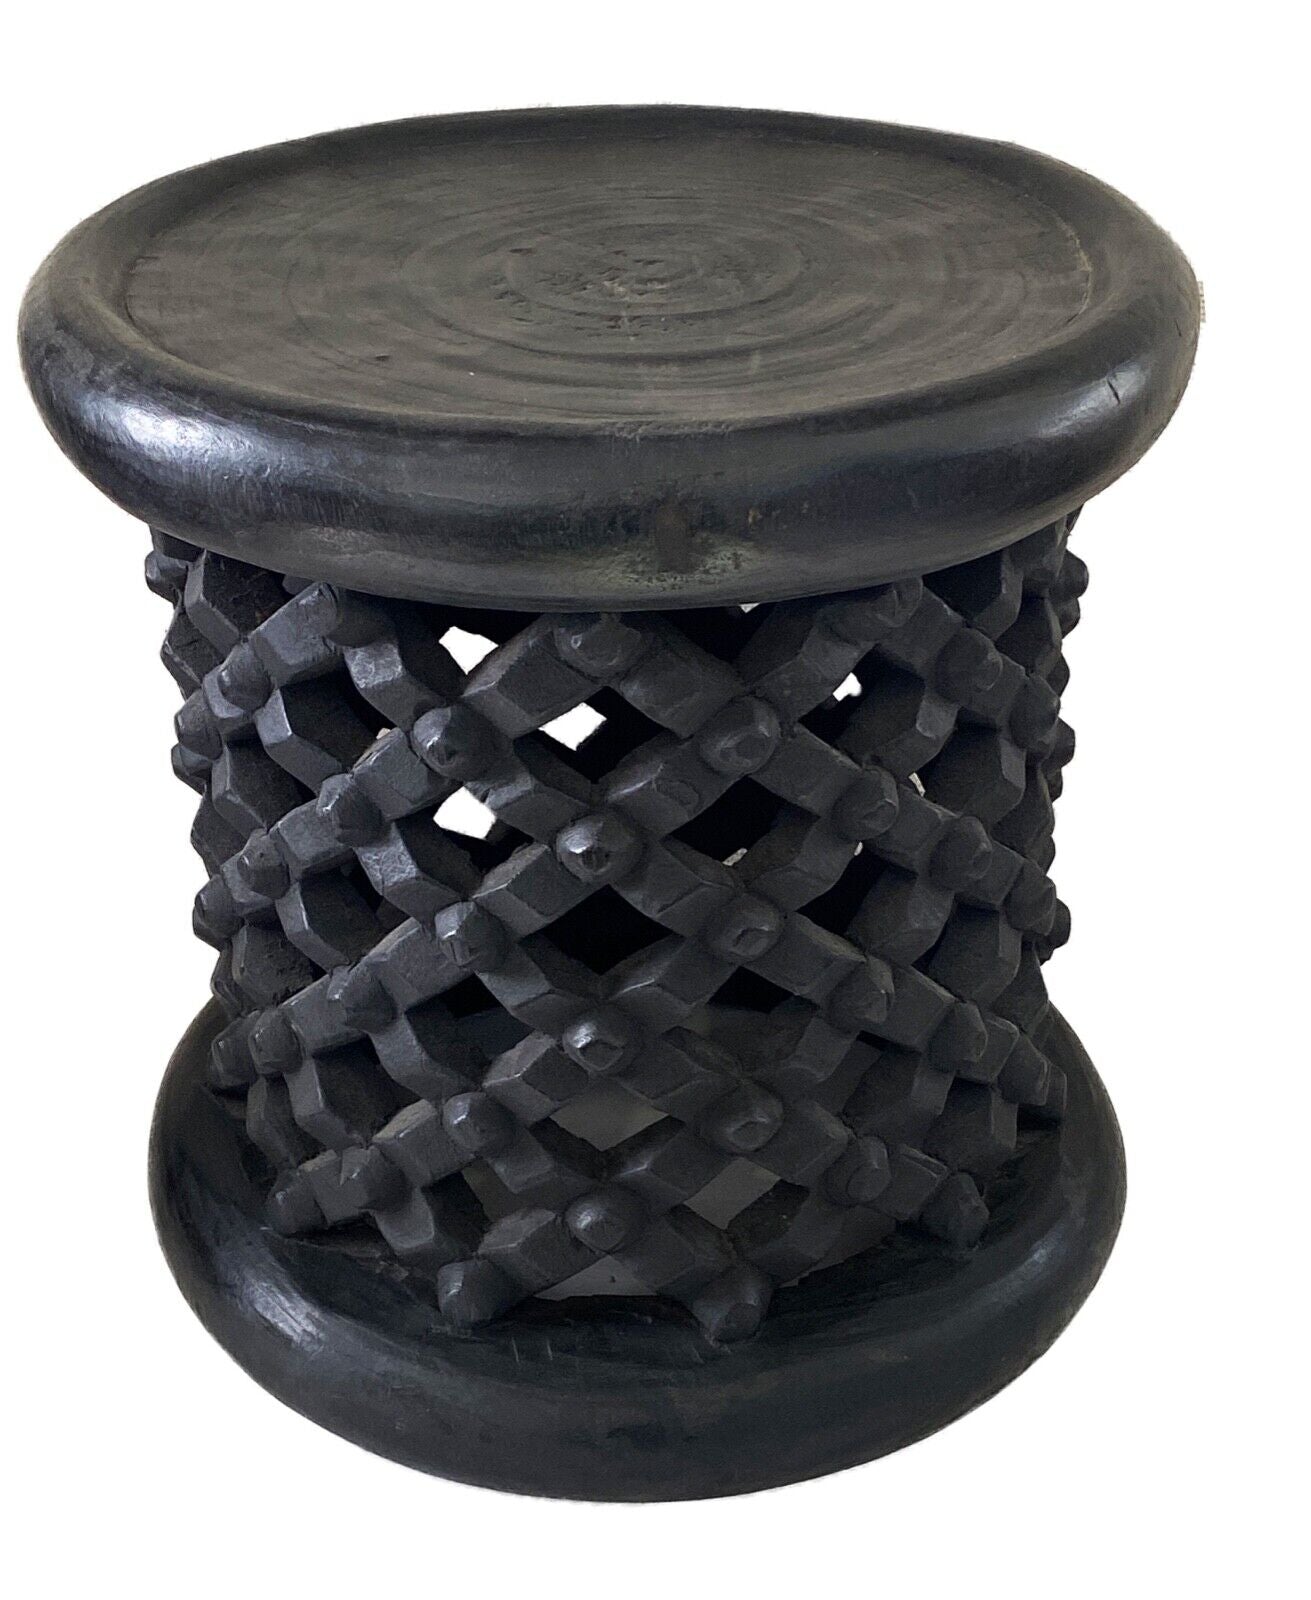 #3813 Old African Bamileke Spider Stool/Table